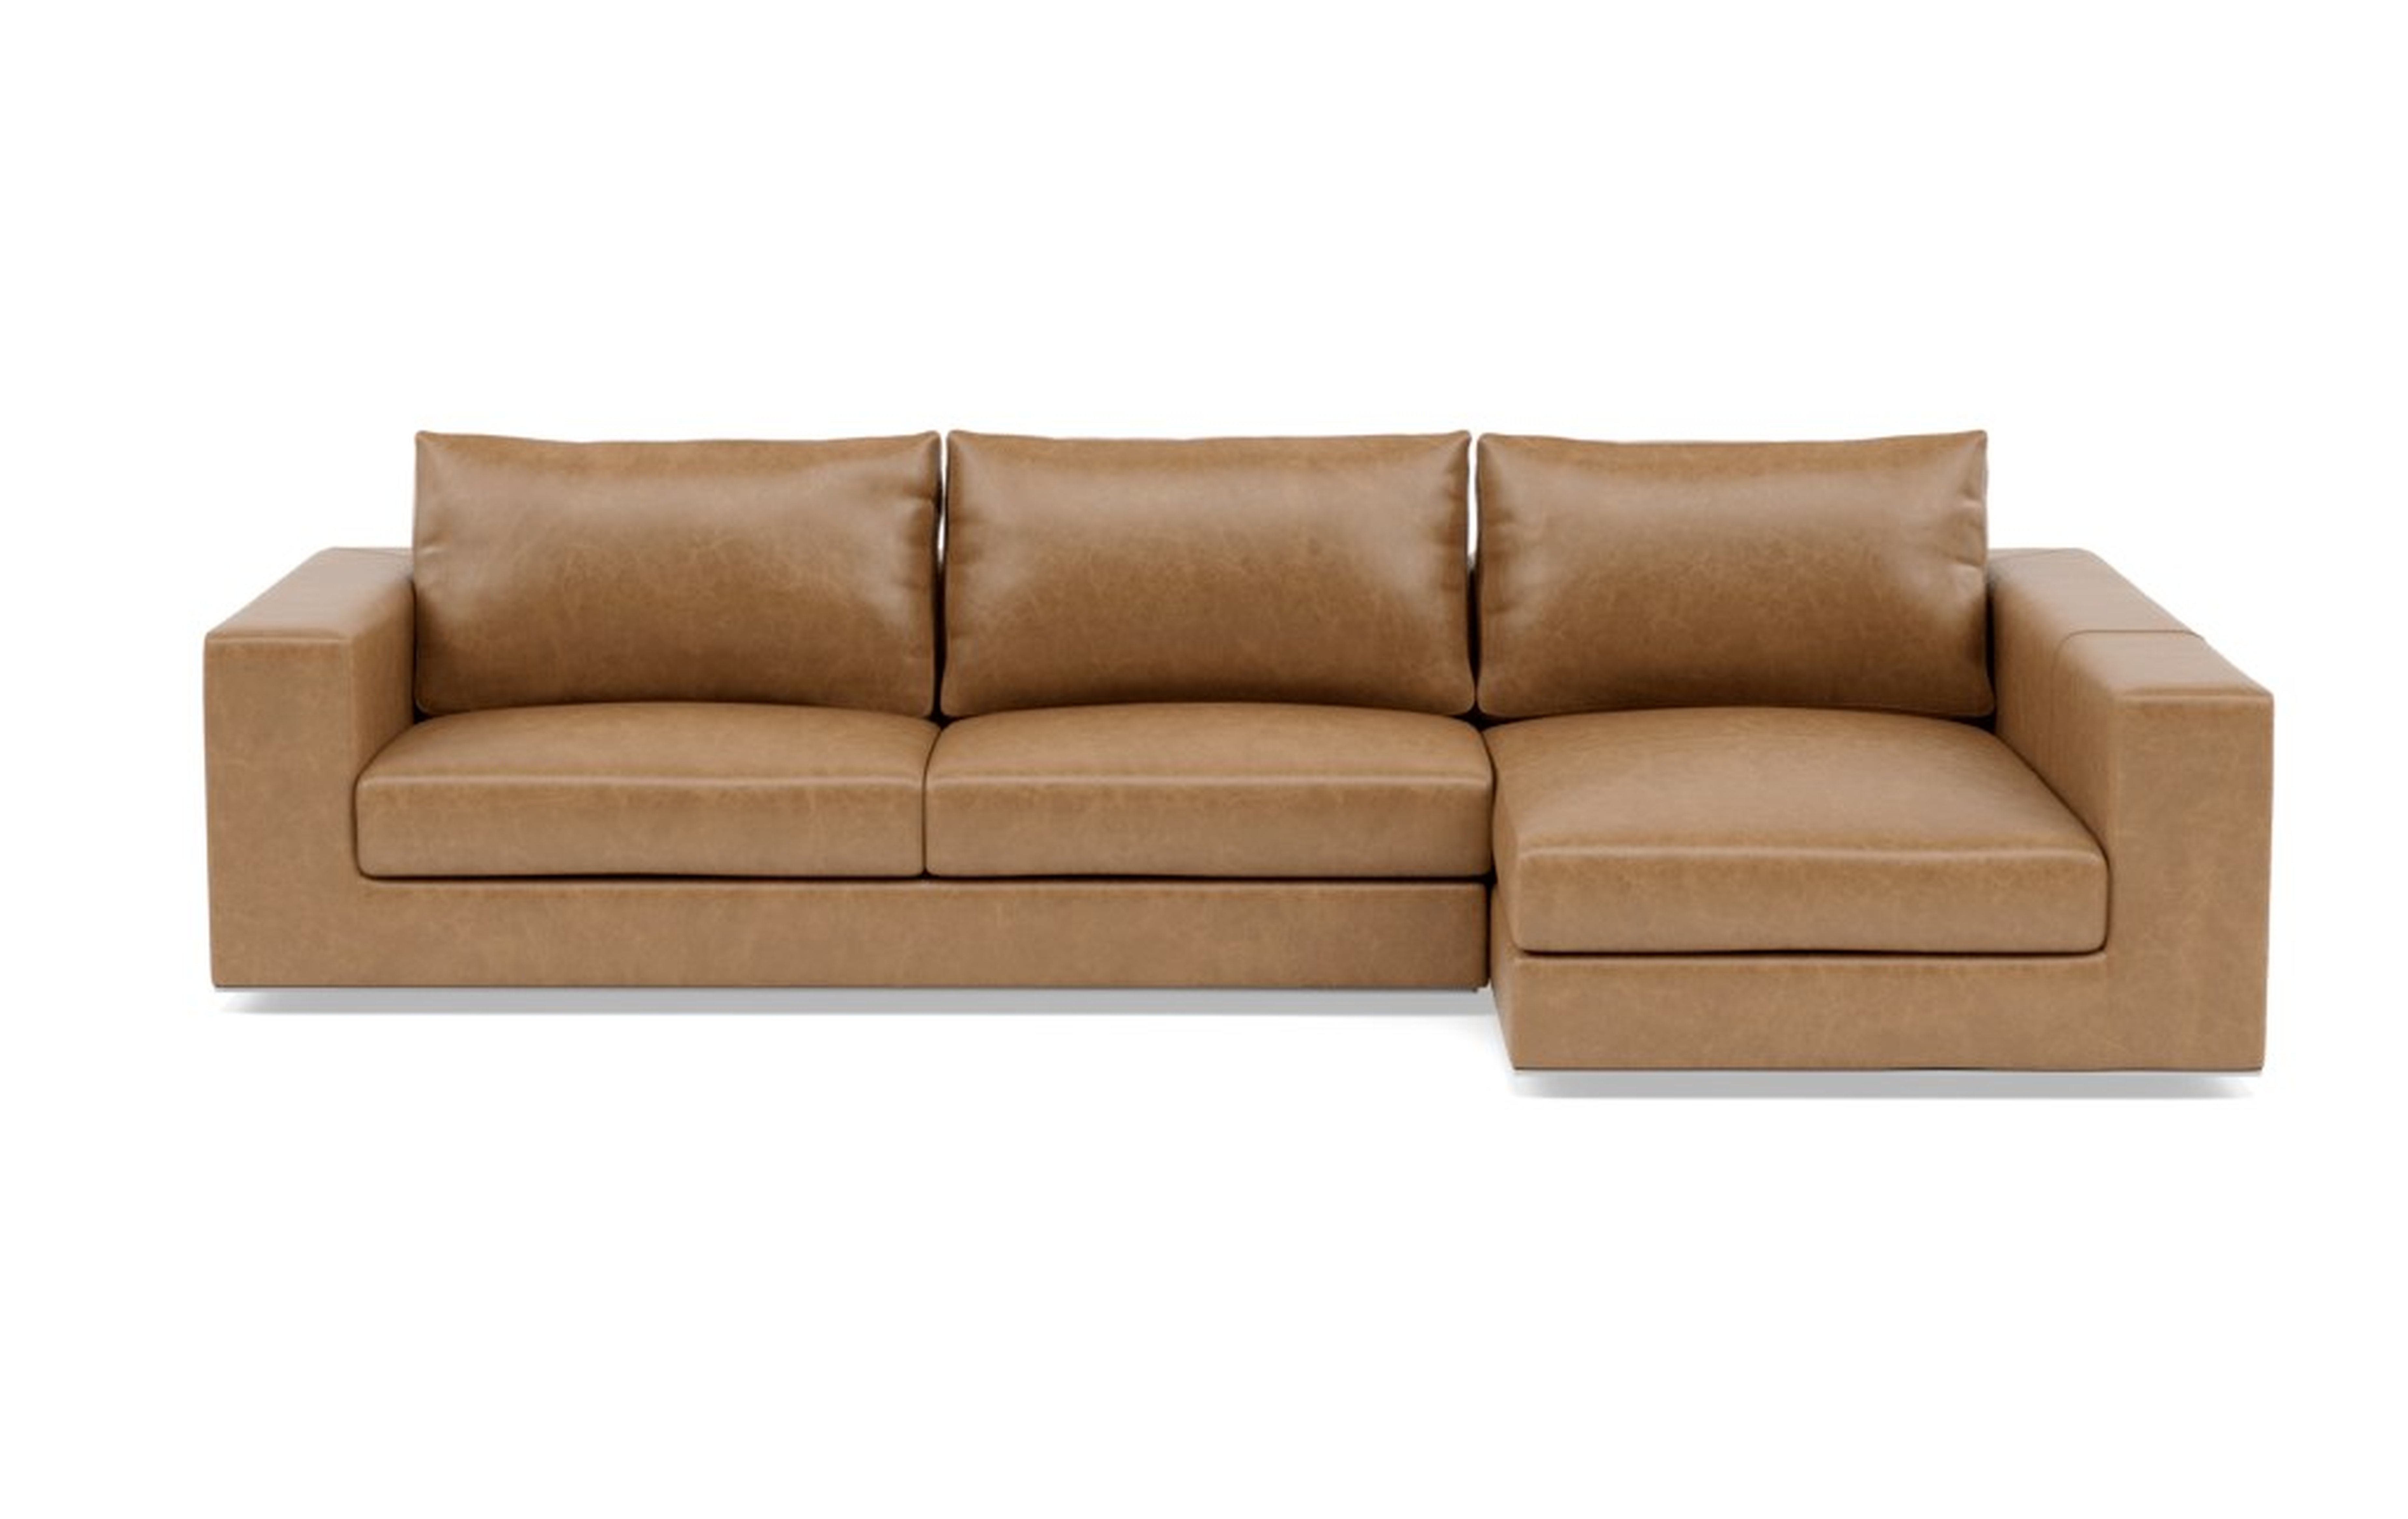 WALTERS LEATHER Leather Sectional Sofa with Right Chaise - Interior Define